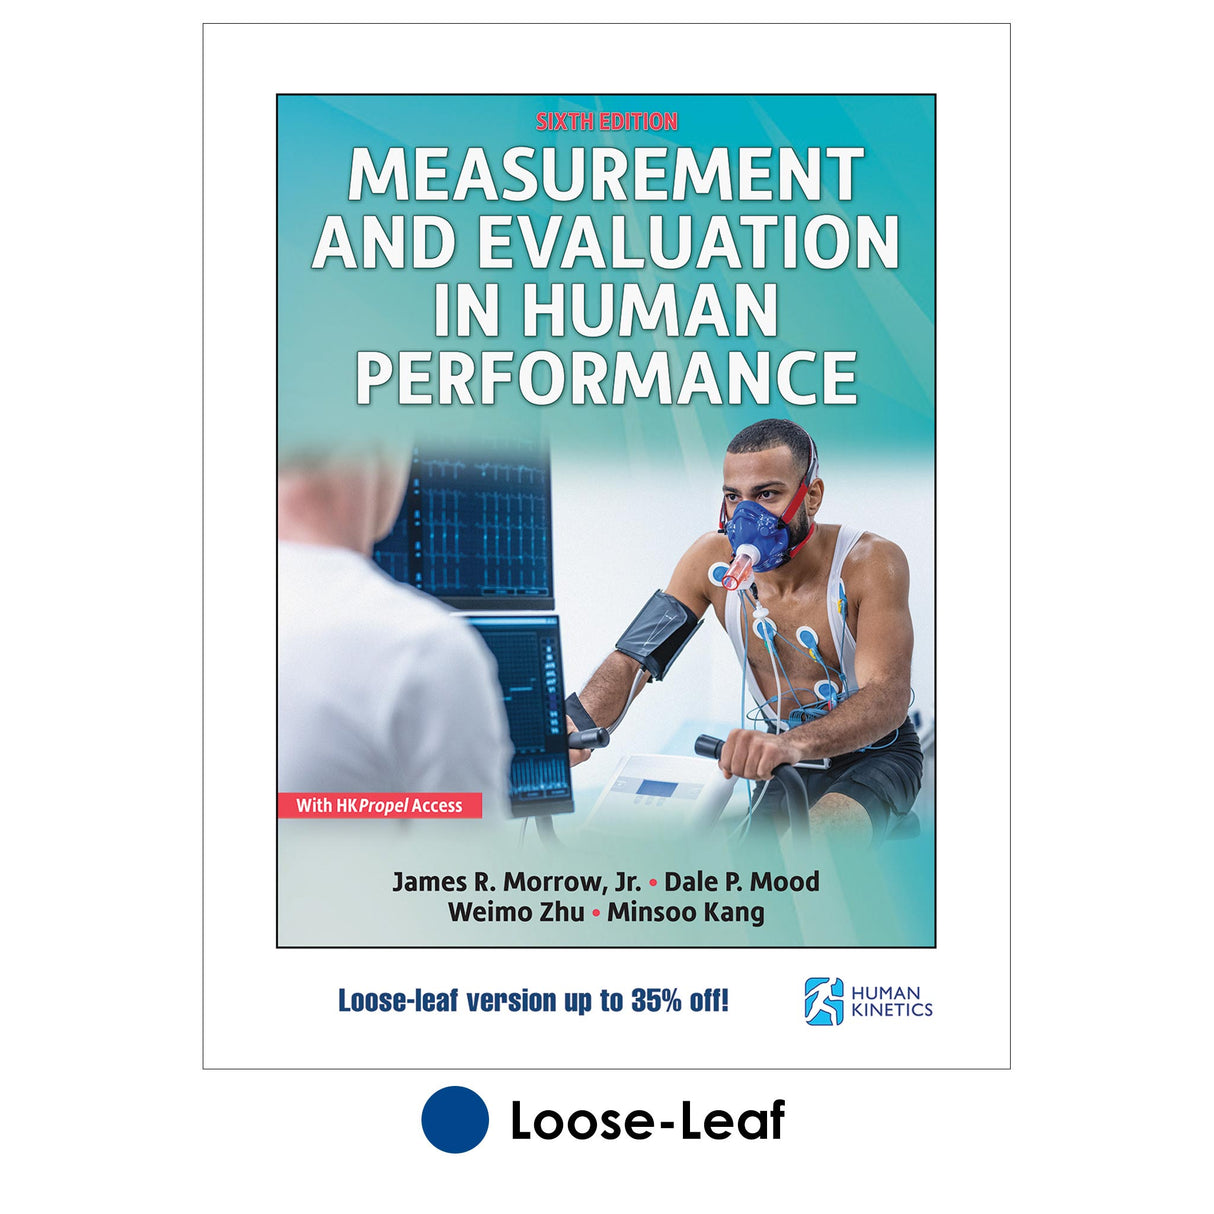 Measurement and Evaluation in Human Performance 6th Edition With HKPropel Access Loose-Leaf Edition